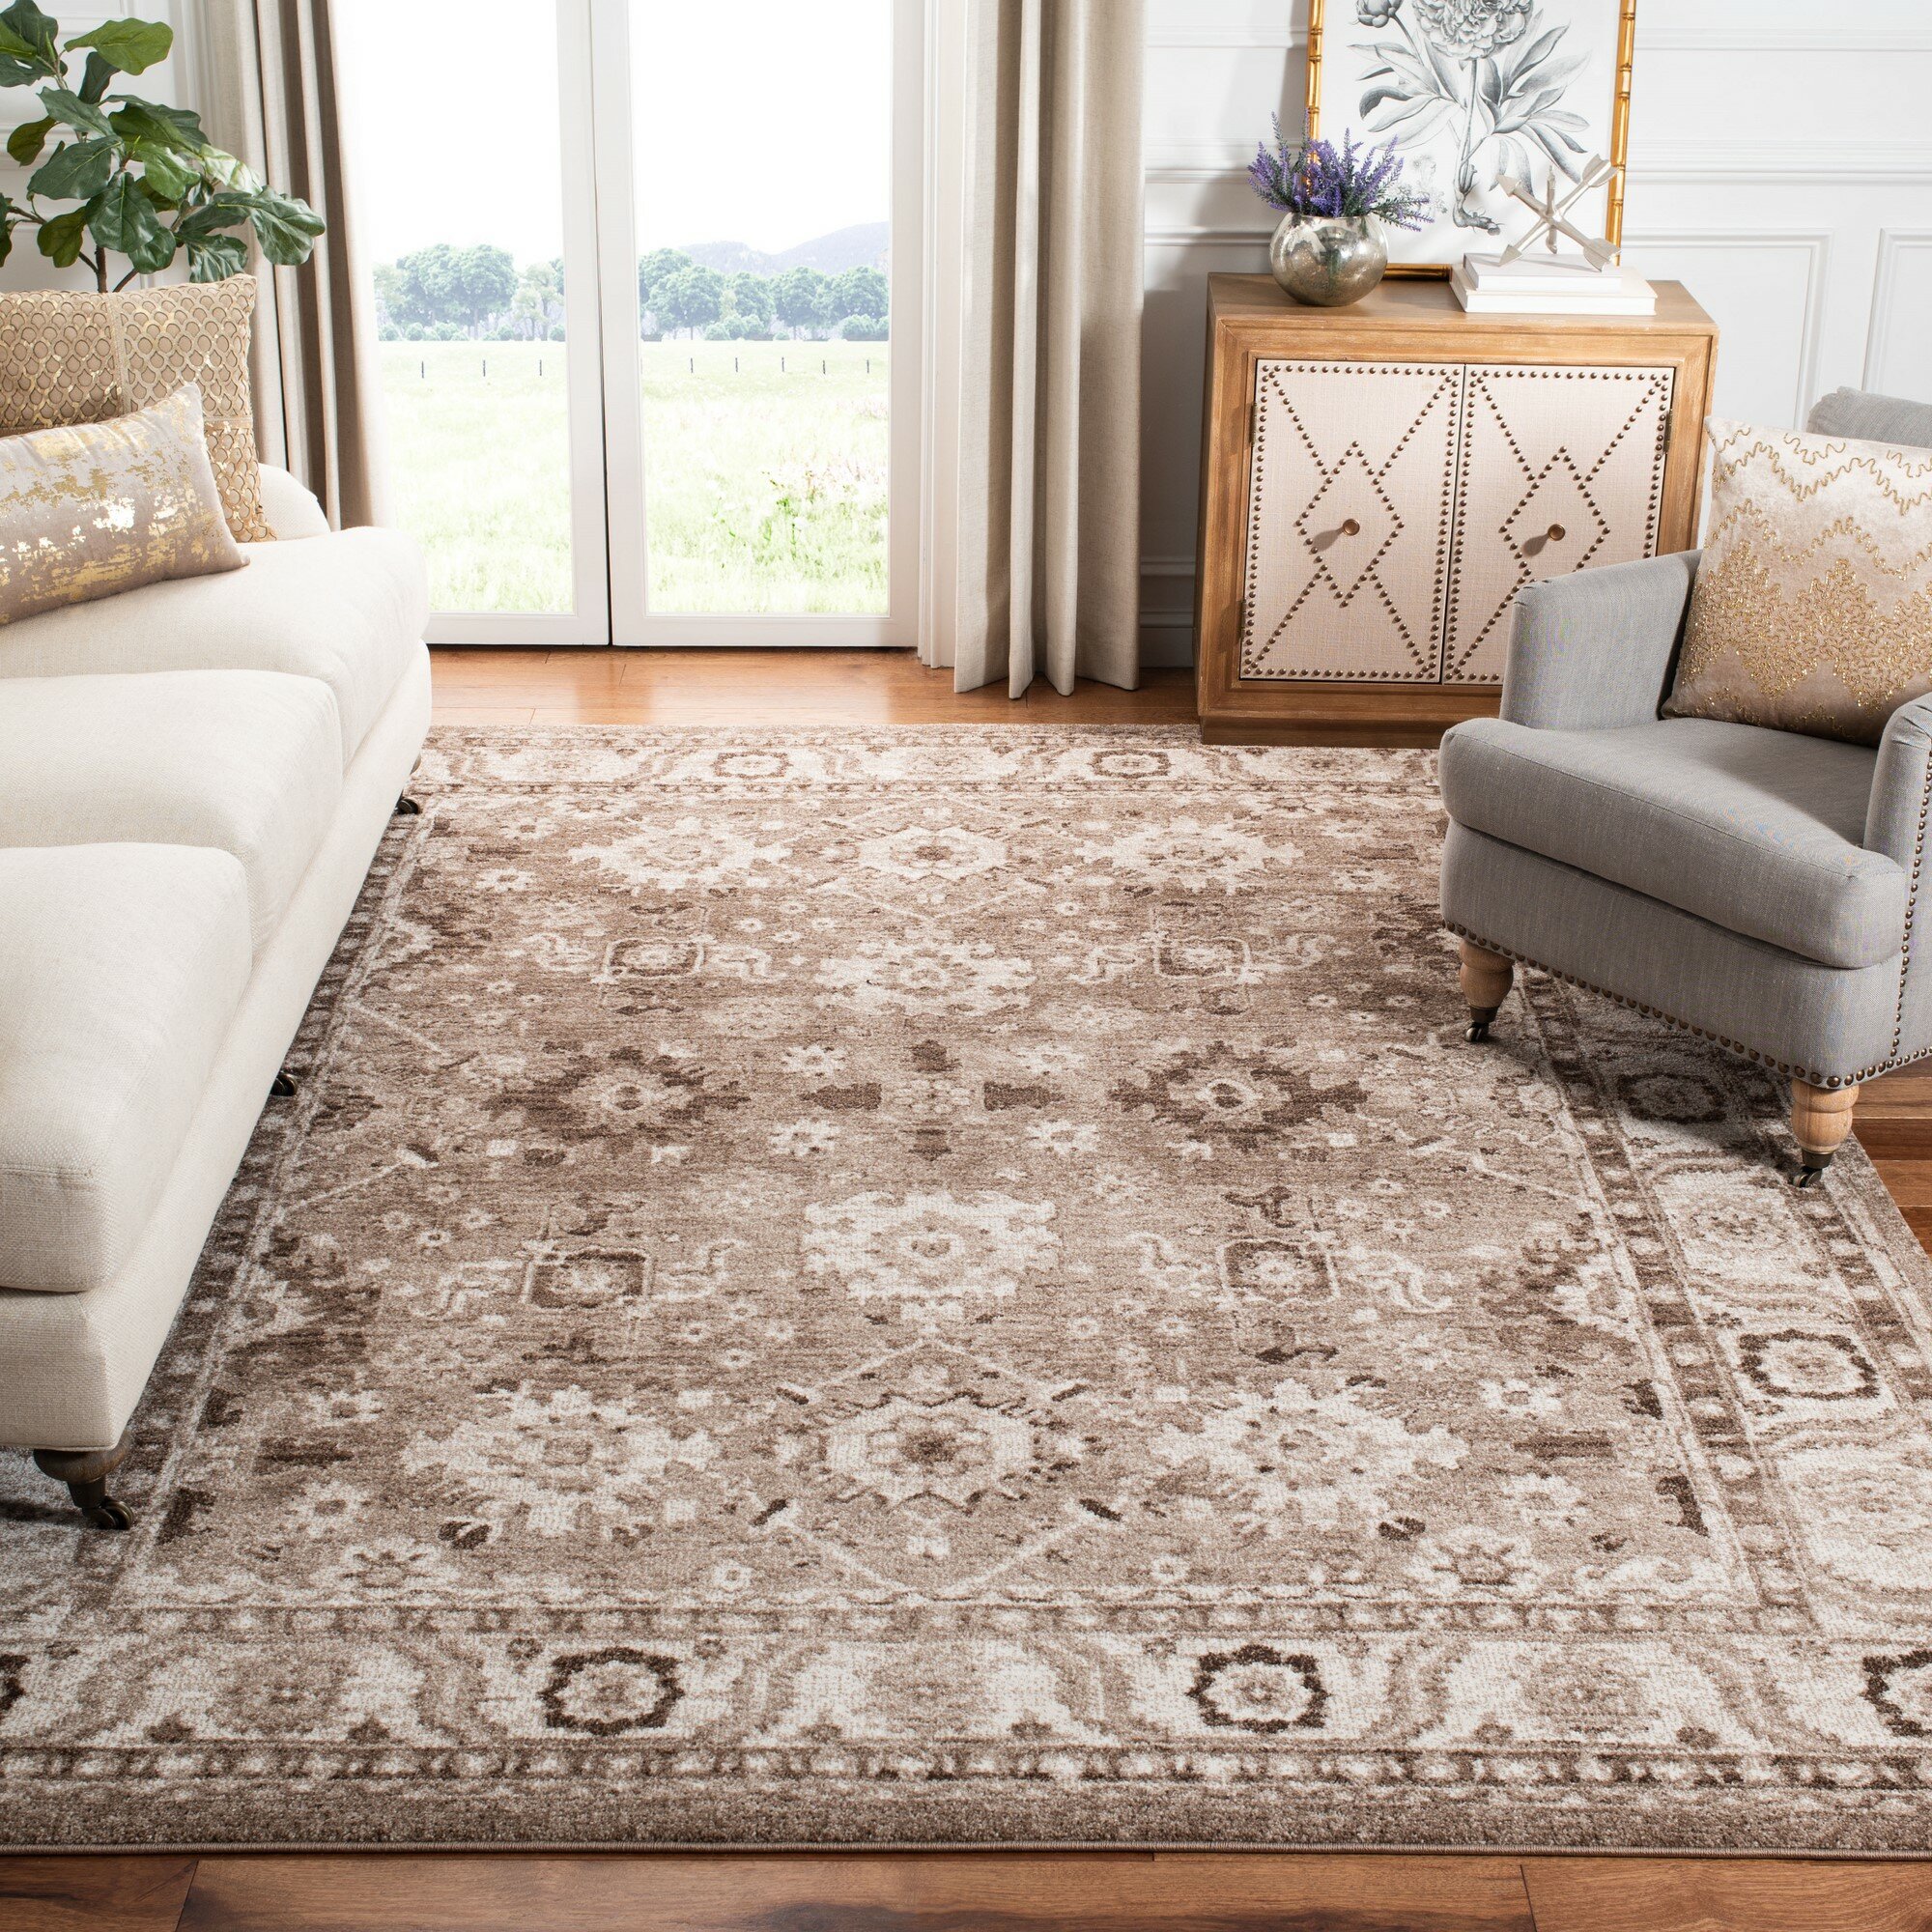 Romantic Flowers 5' x 7' Area Rug Non-Shedding Stain Resistant Living Room Bedroom Accent Rug 